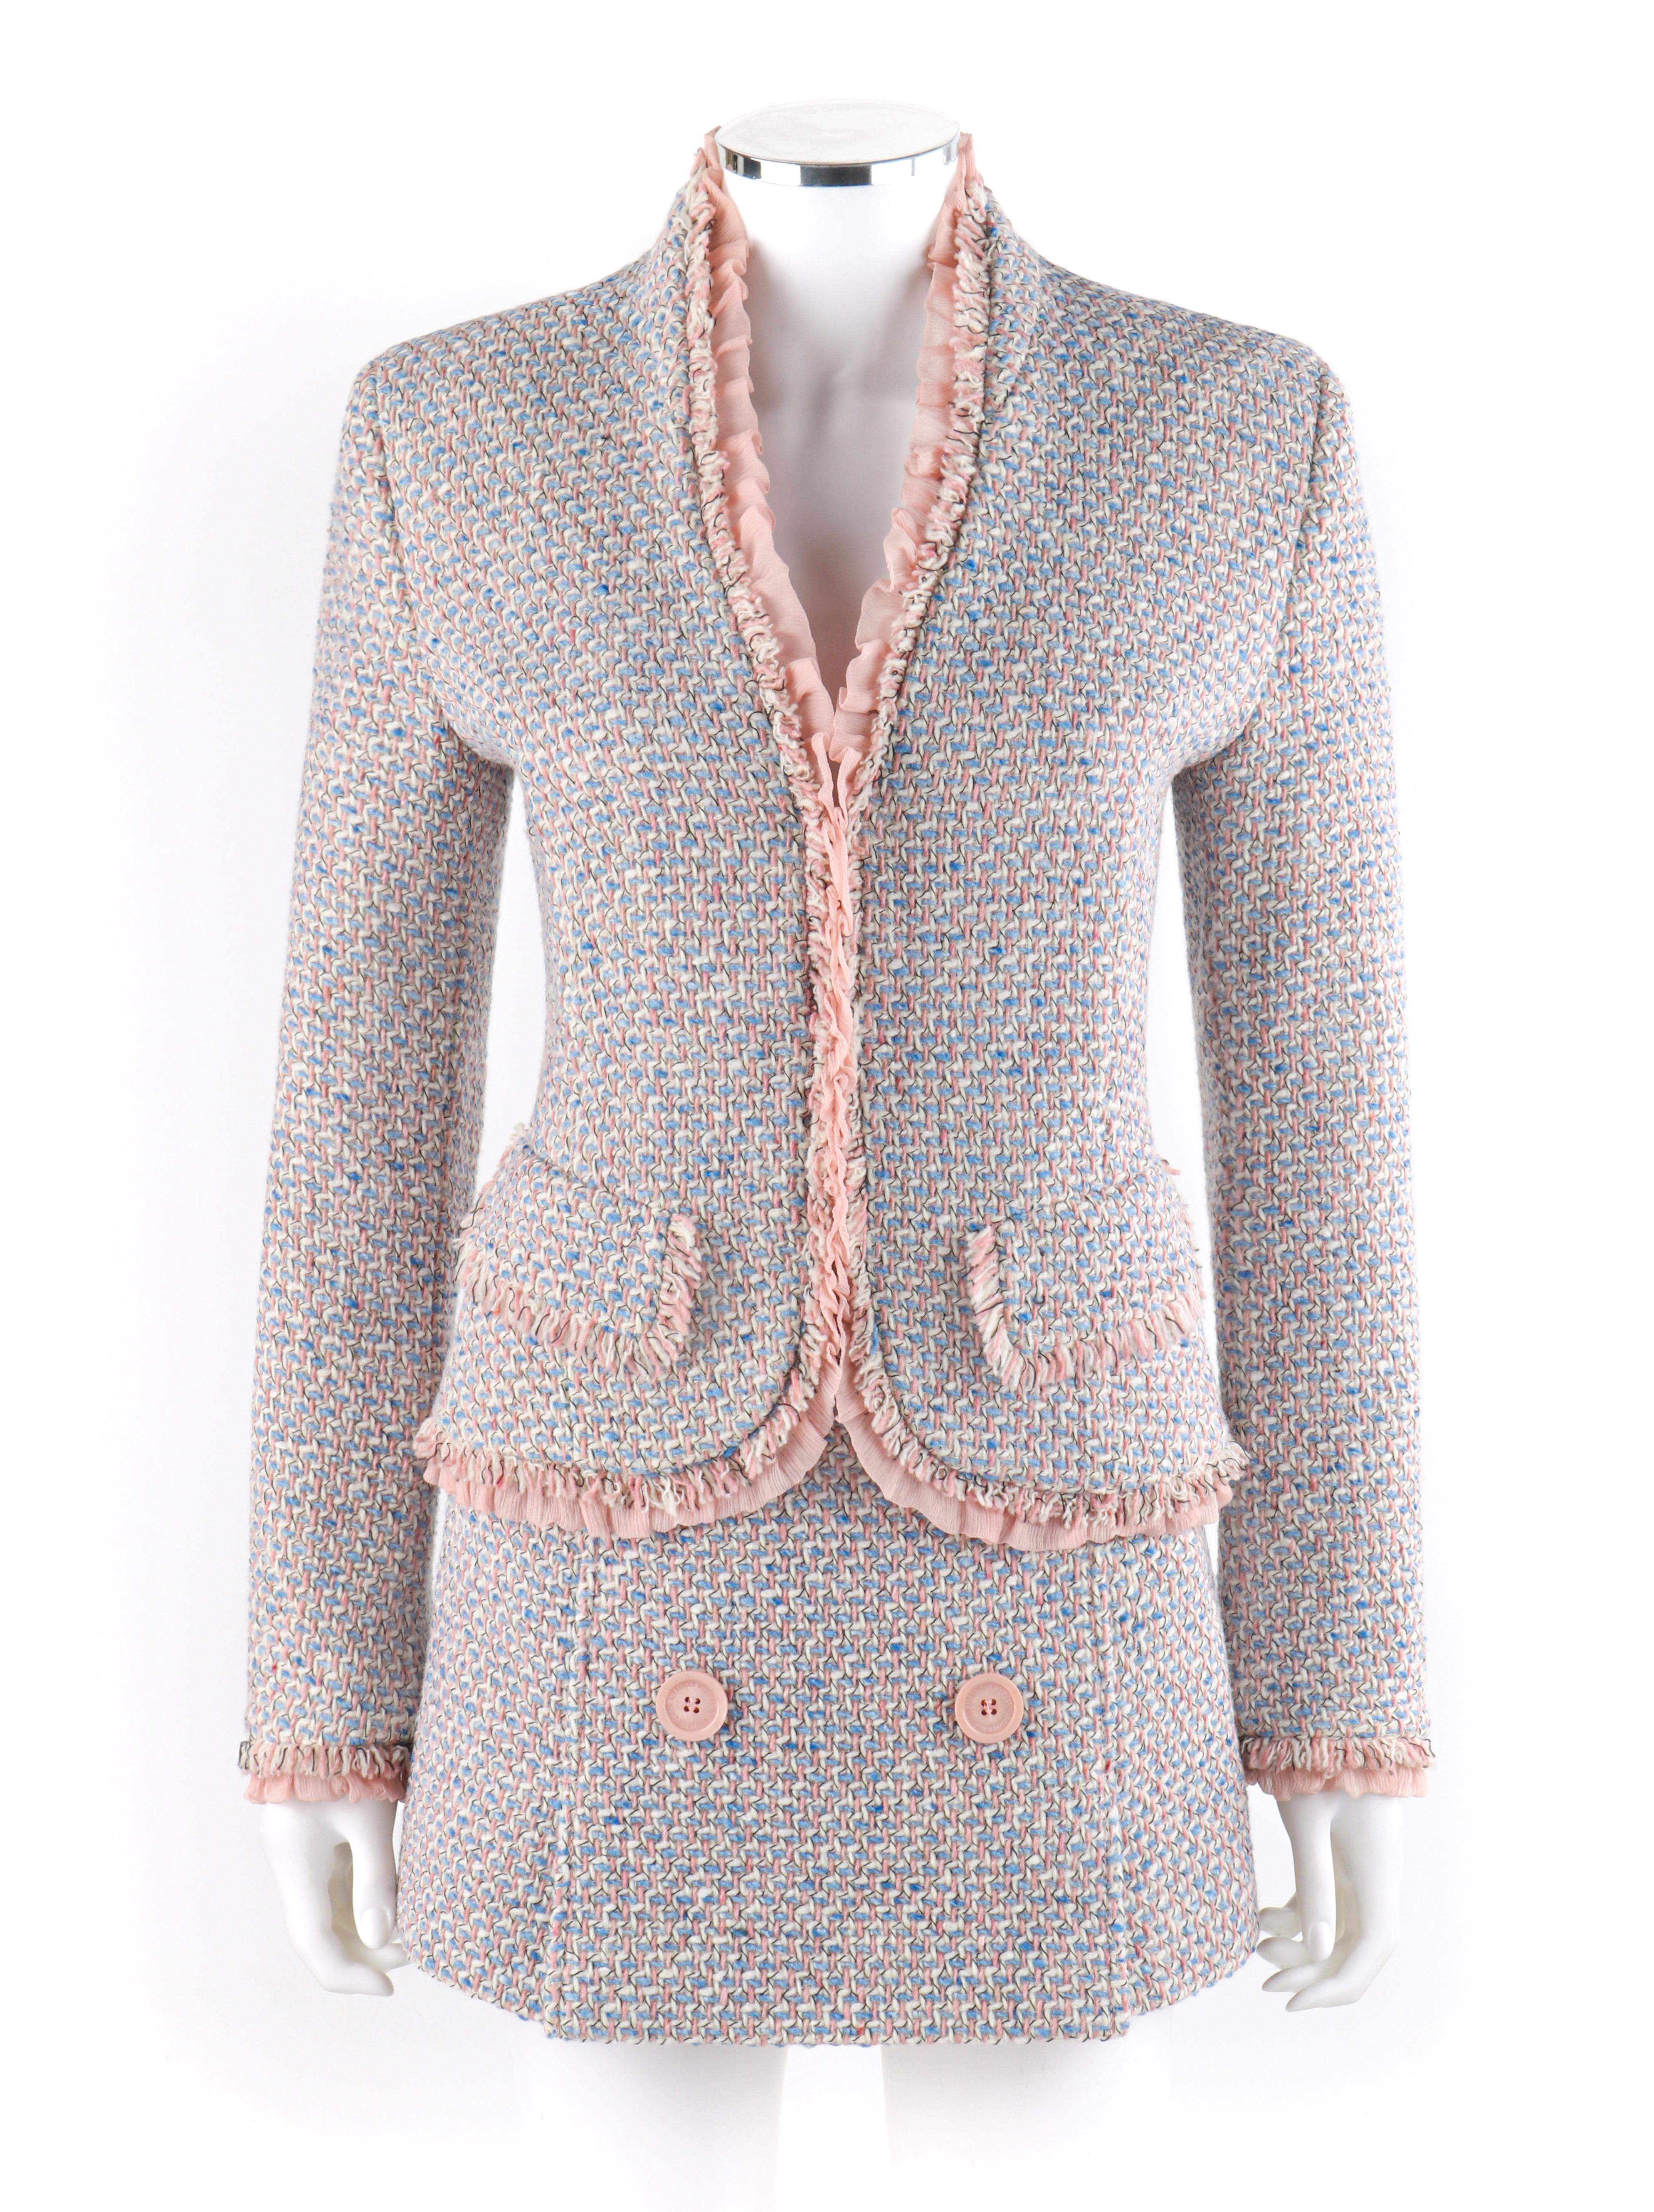 ALEXANDER McQUEEN c.1996 Pink Blue Boucle Tweed Blazer Jacket Mini Skirt Set NWT

Brand / Manufacturer: Alexander McQueen
Collection: 1996
Designer: Alexander McQueen
Style: Fitted blazer jacket with standing collar and v neck;  mini paneled pleated